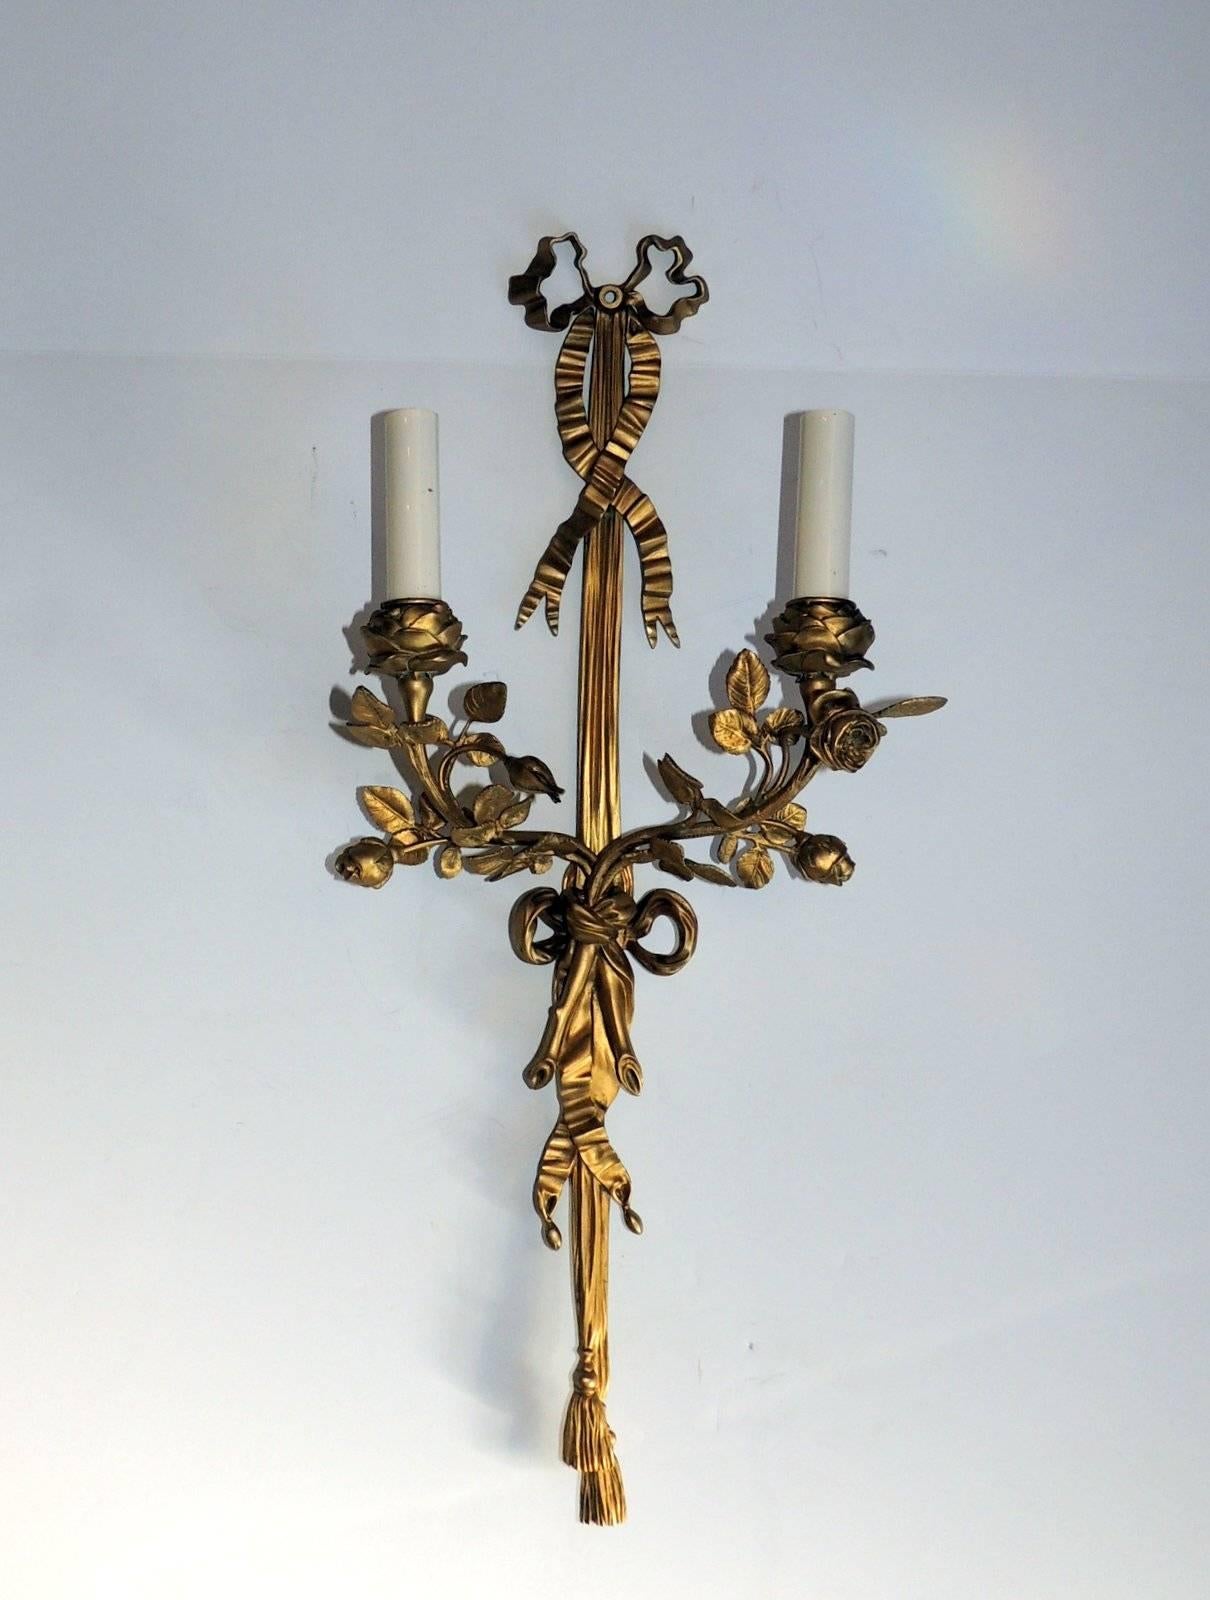 Wonderful pair of French doré bronze two-arm sconces. Beautiful ribbon top and draping down to the tassel at the bottom, each arm is a rose candle cup with floral and leaves surrounding them. 

Sold as a pair.

Measures: 22" L x 9" W x 4.5